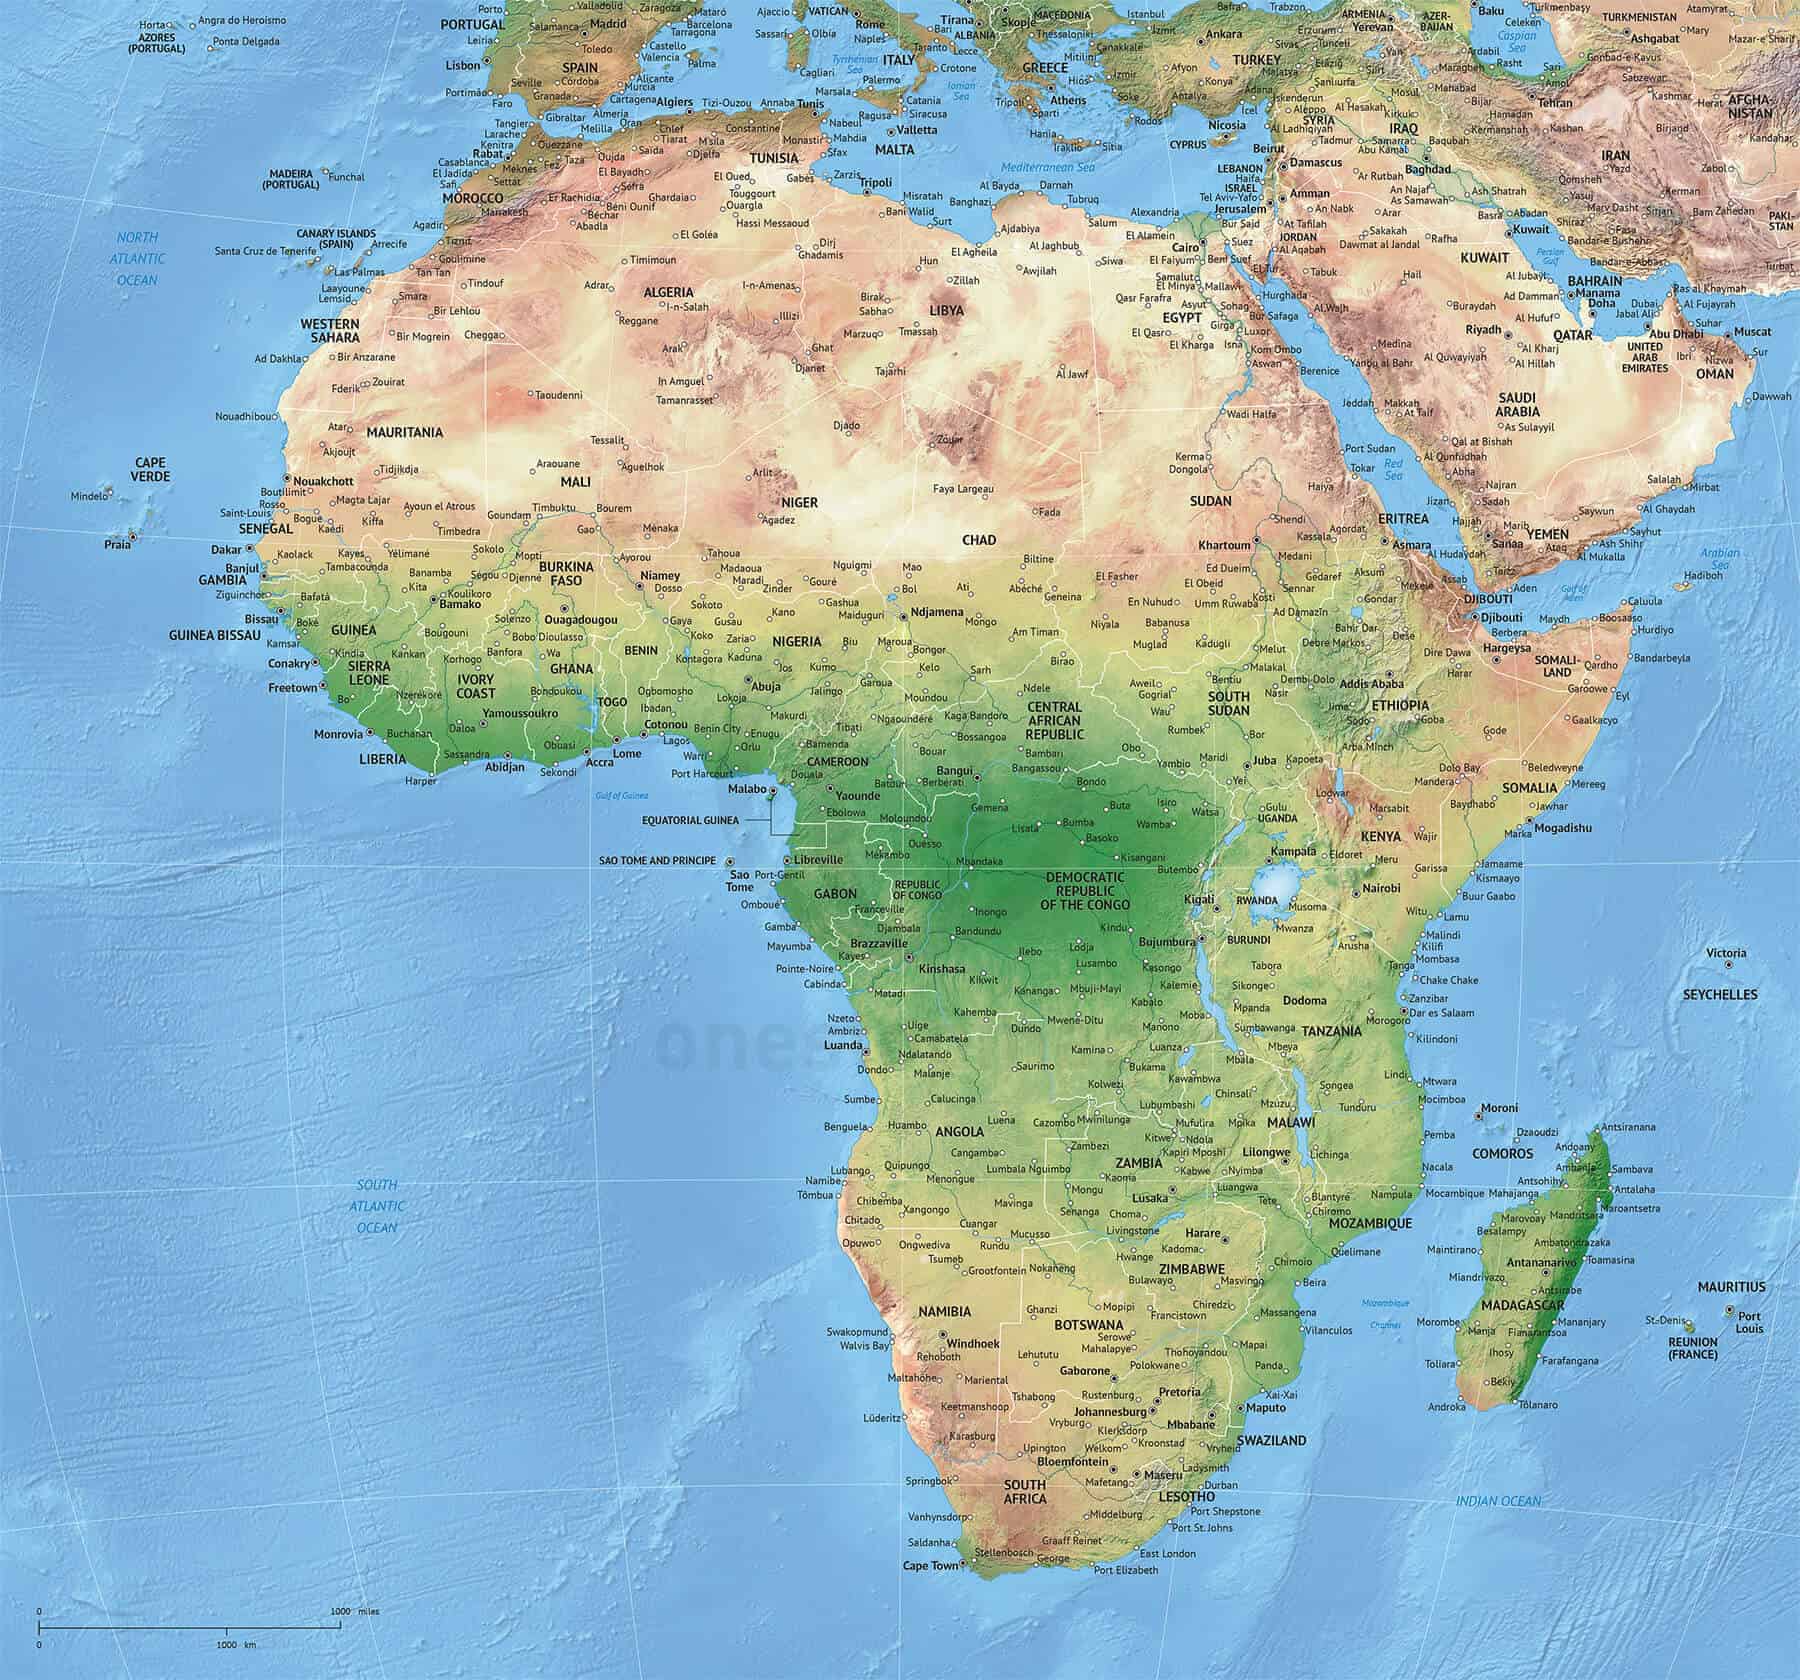 africa-continent-detailed-relief-and-political-map-detailed-relief-and